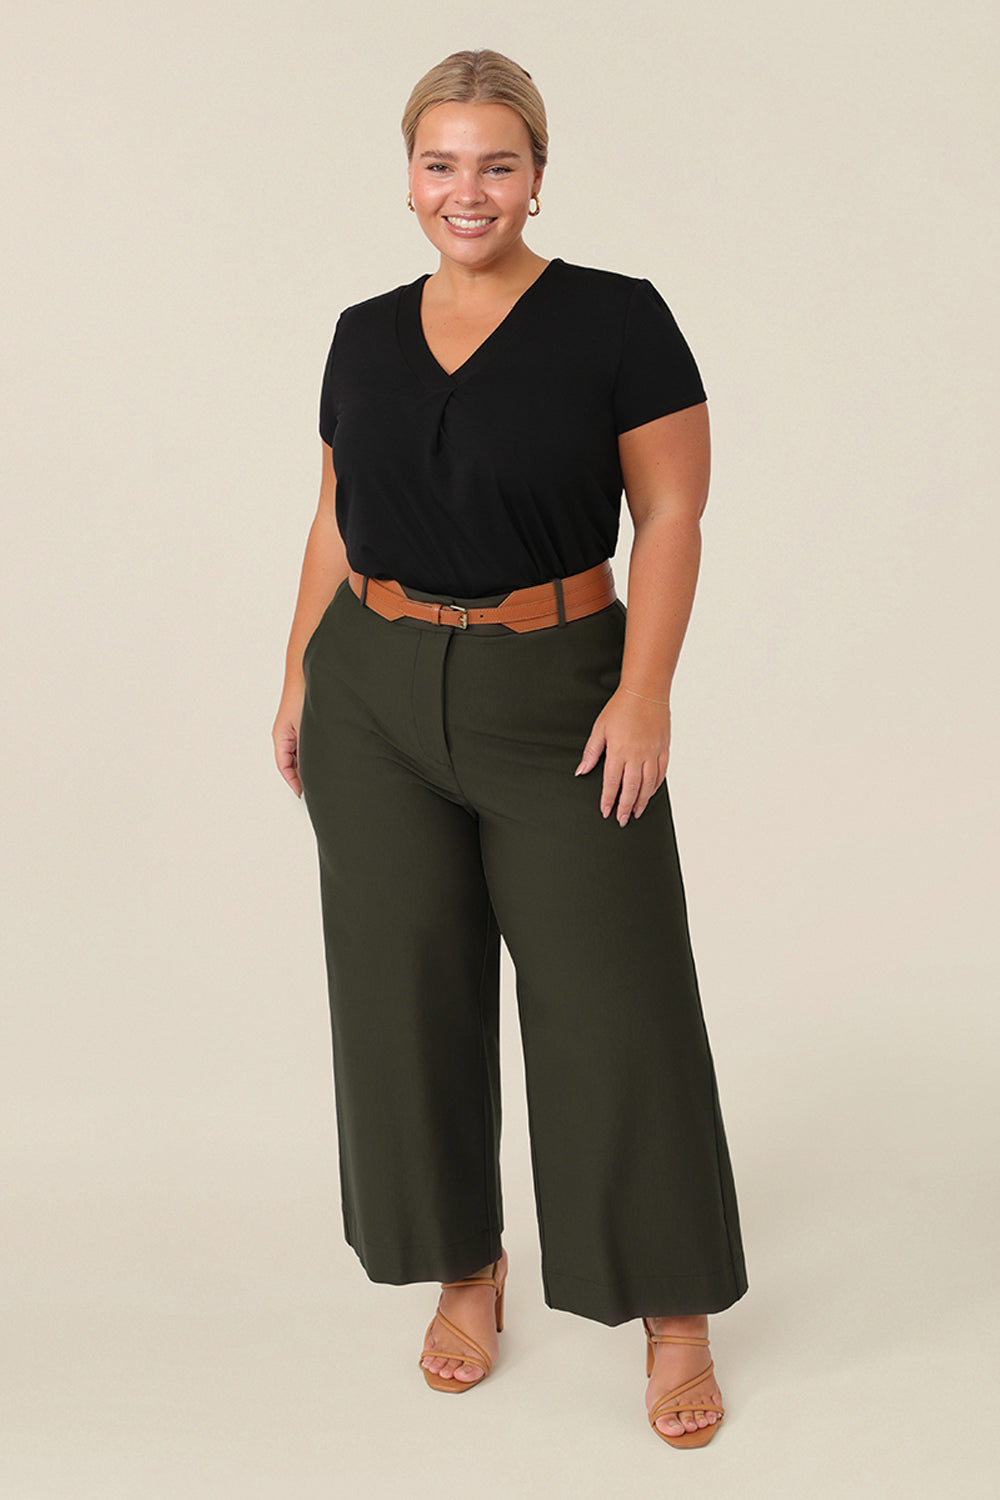 Good pants for petite women, these are wide leg, cropped, tailored workwear pants. Worn by a petite height, size 16 curvy woman, together with a short sleeve, black top and tan belt, these are great workwear pants Made in Australia, in stretch jersey, these work trousers have a comfortable fit.